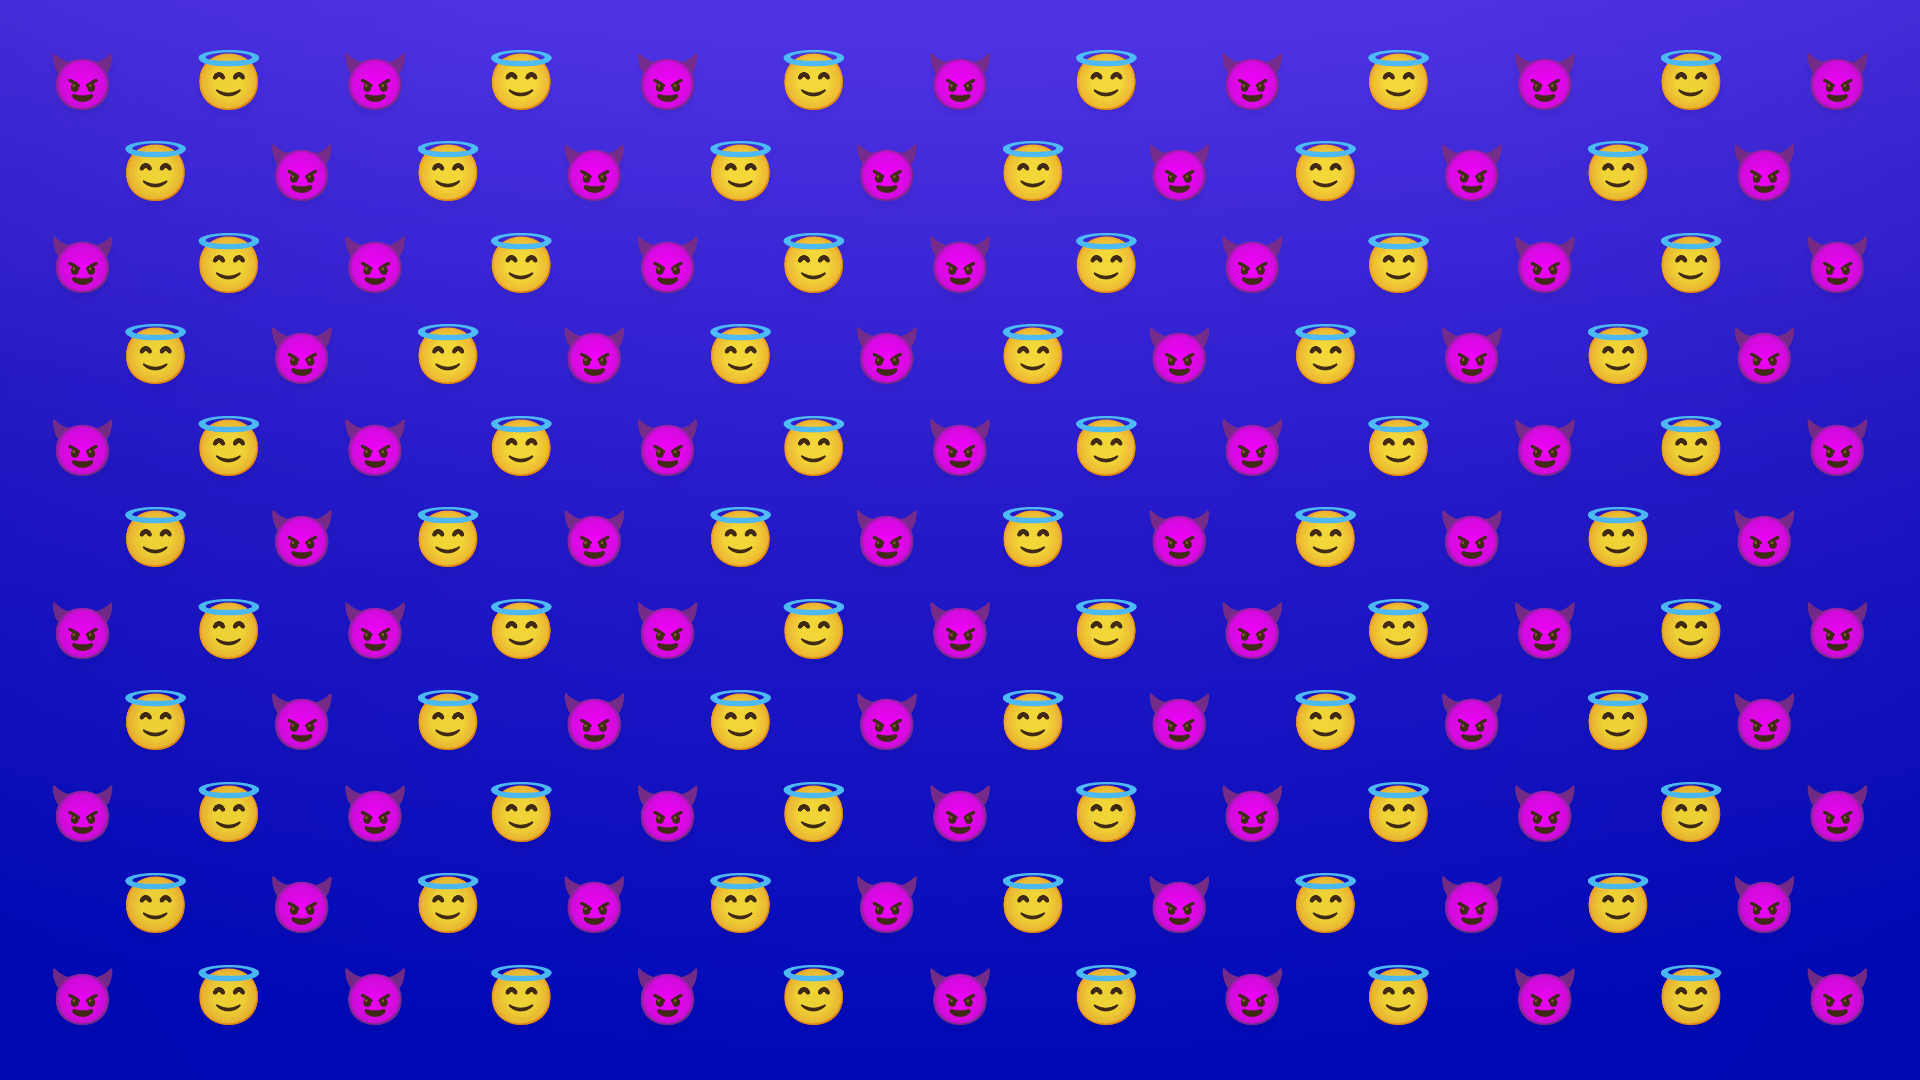 This website lets you create custom wallpaper from your favorite emojis